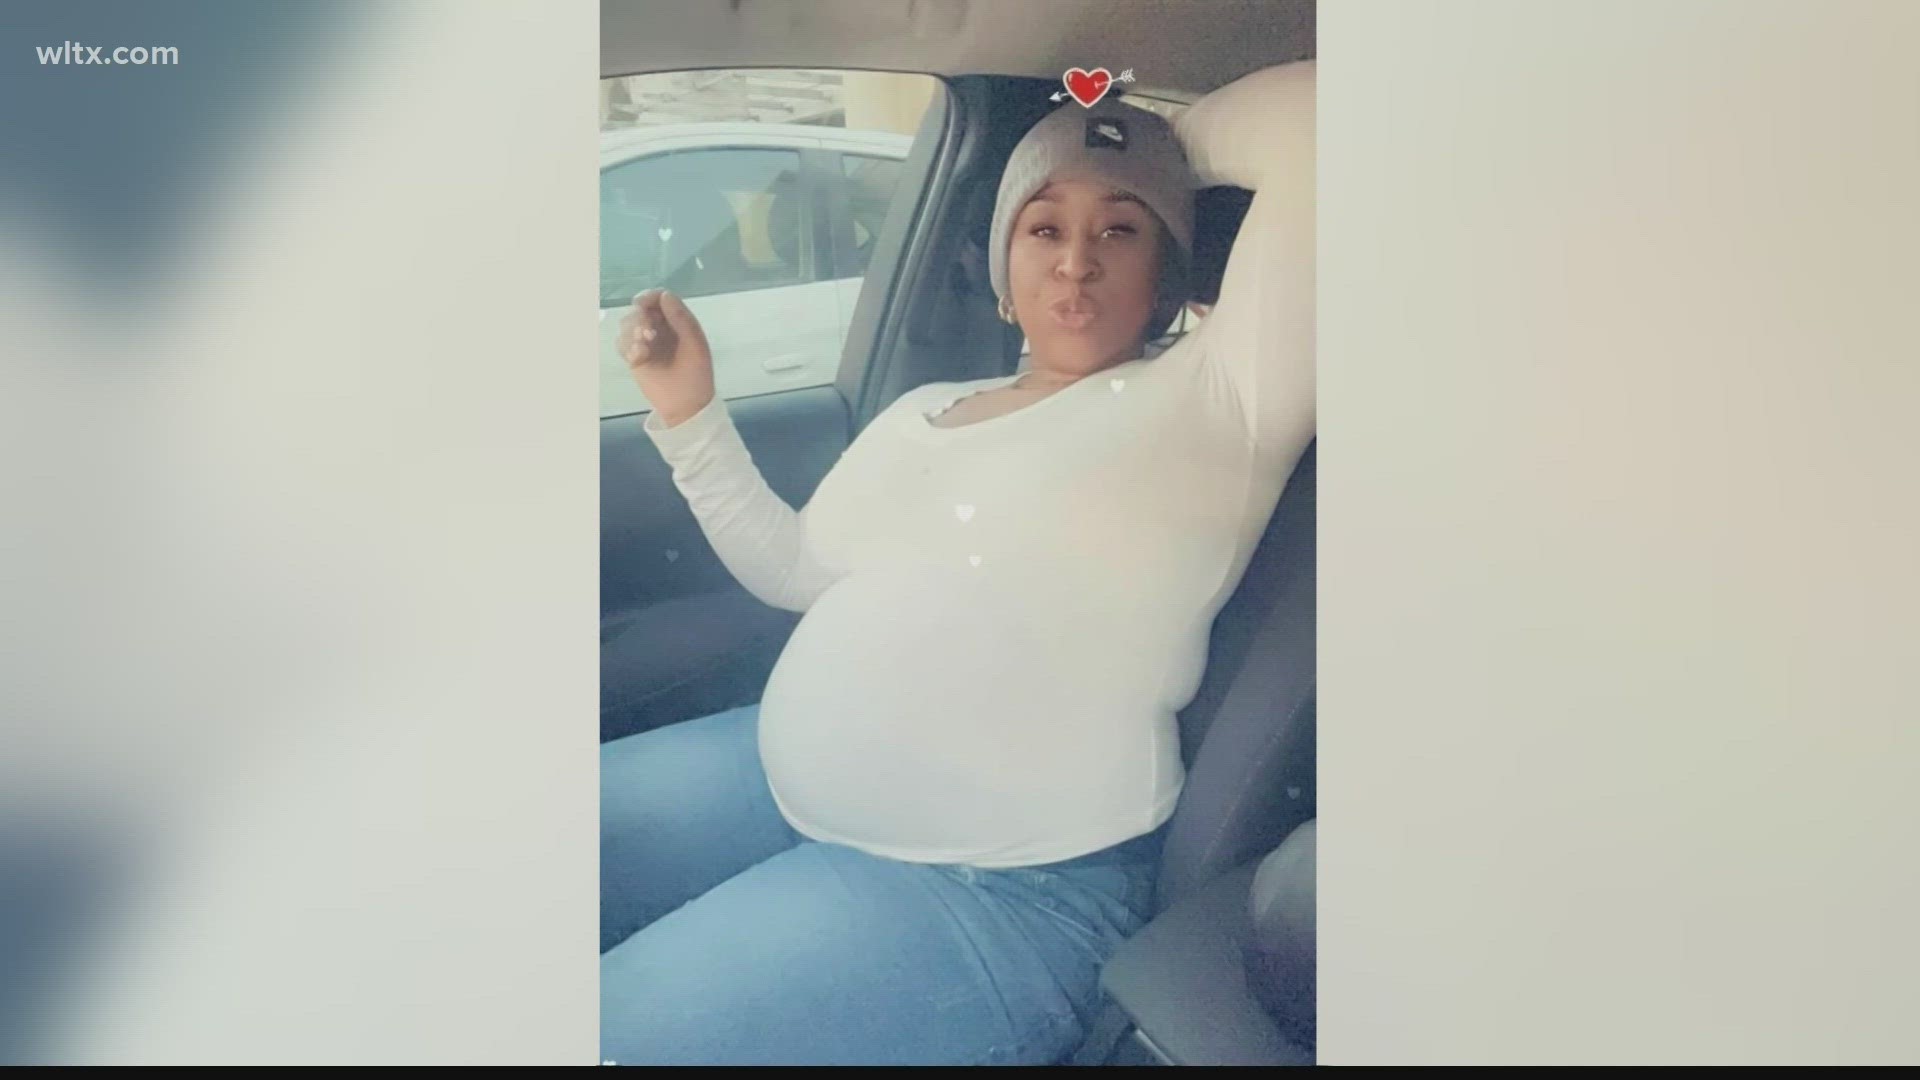 Brown was between 27 and 28 weeks pregnant. Her child did not survive.